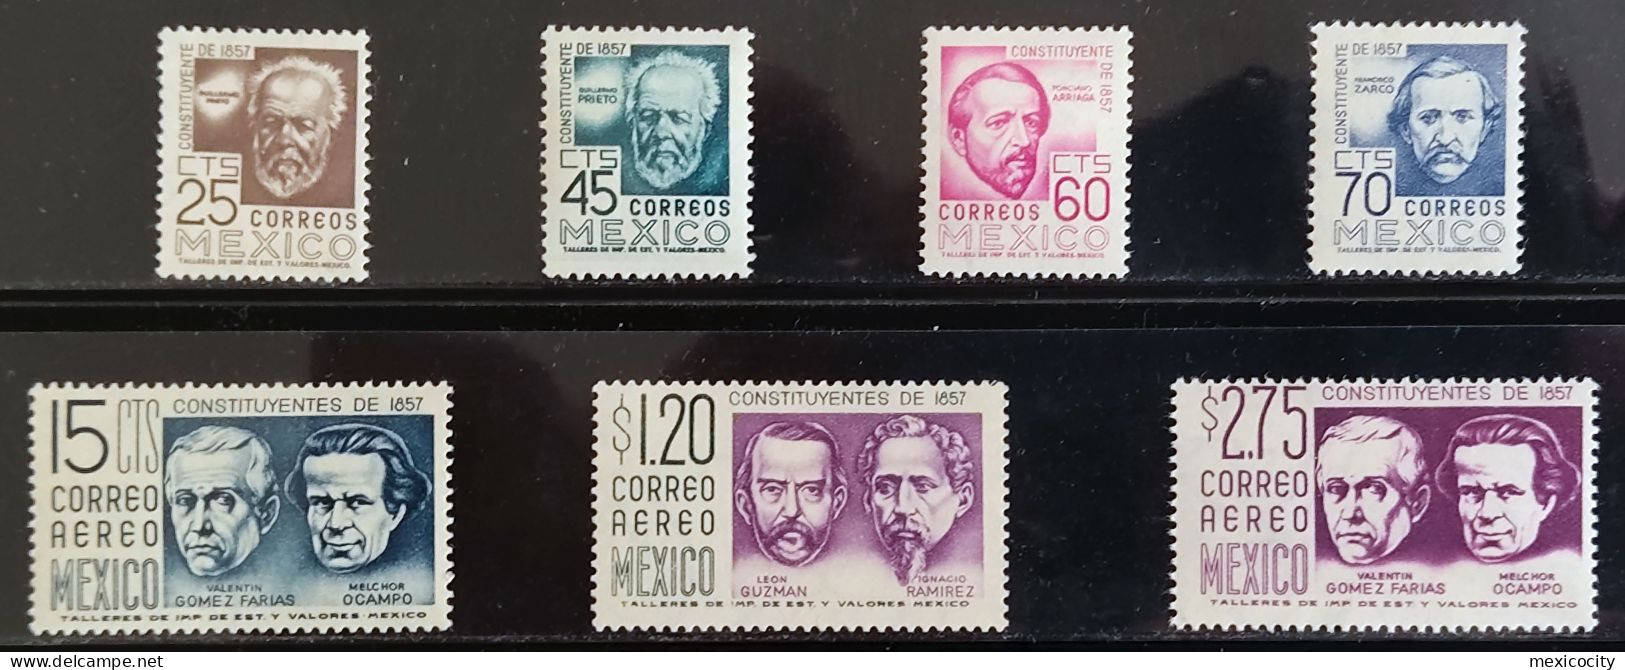 MEXICO 1957 - 1857 CONSTITUTION Centy. Set Scott 897A-900 & C236-C237A Mint Unmounted MNH, Nice & Rather Scarce Set Thus - Mexico